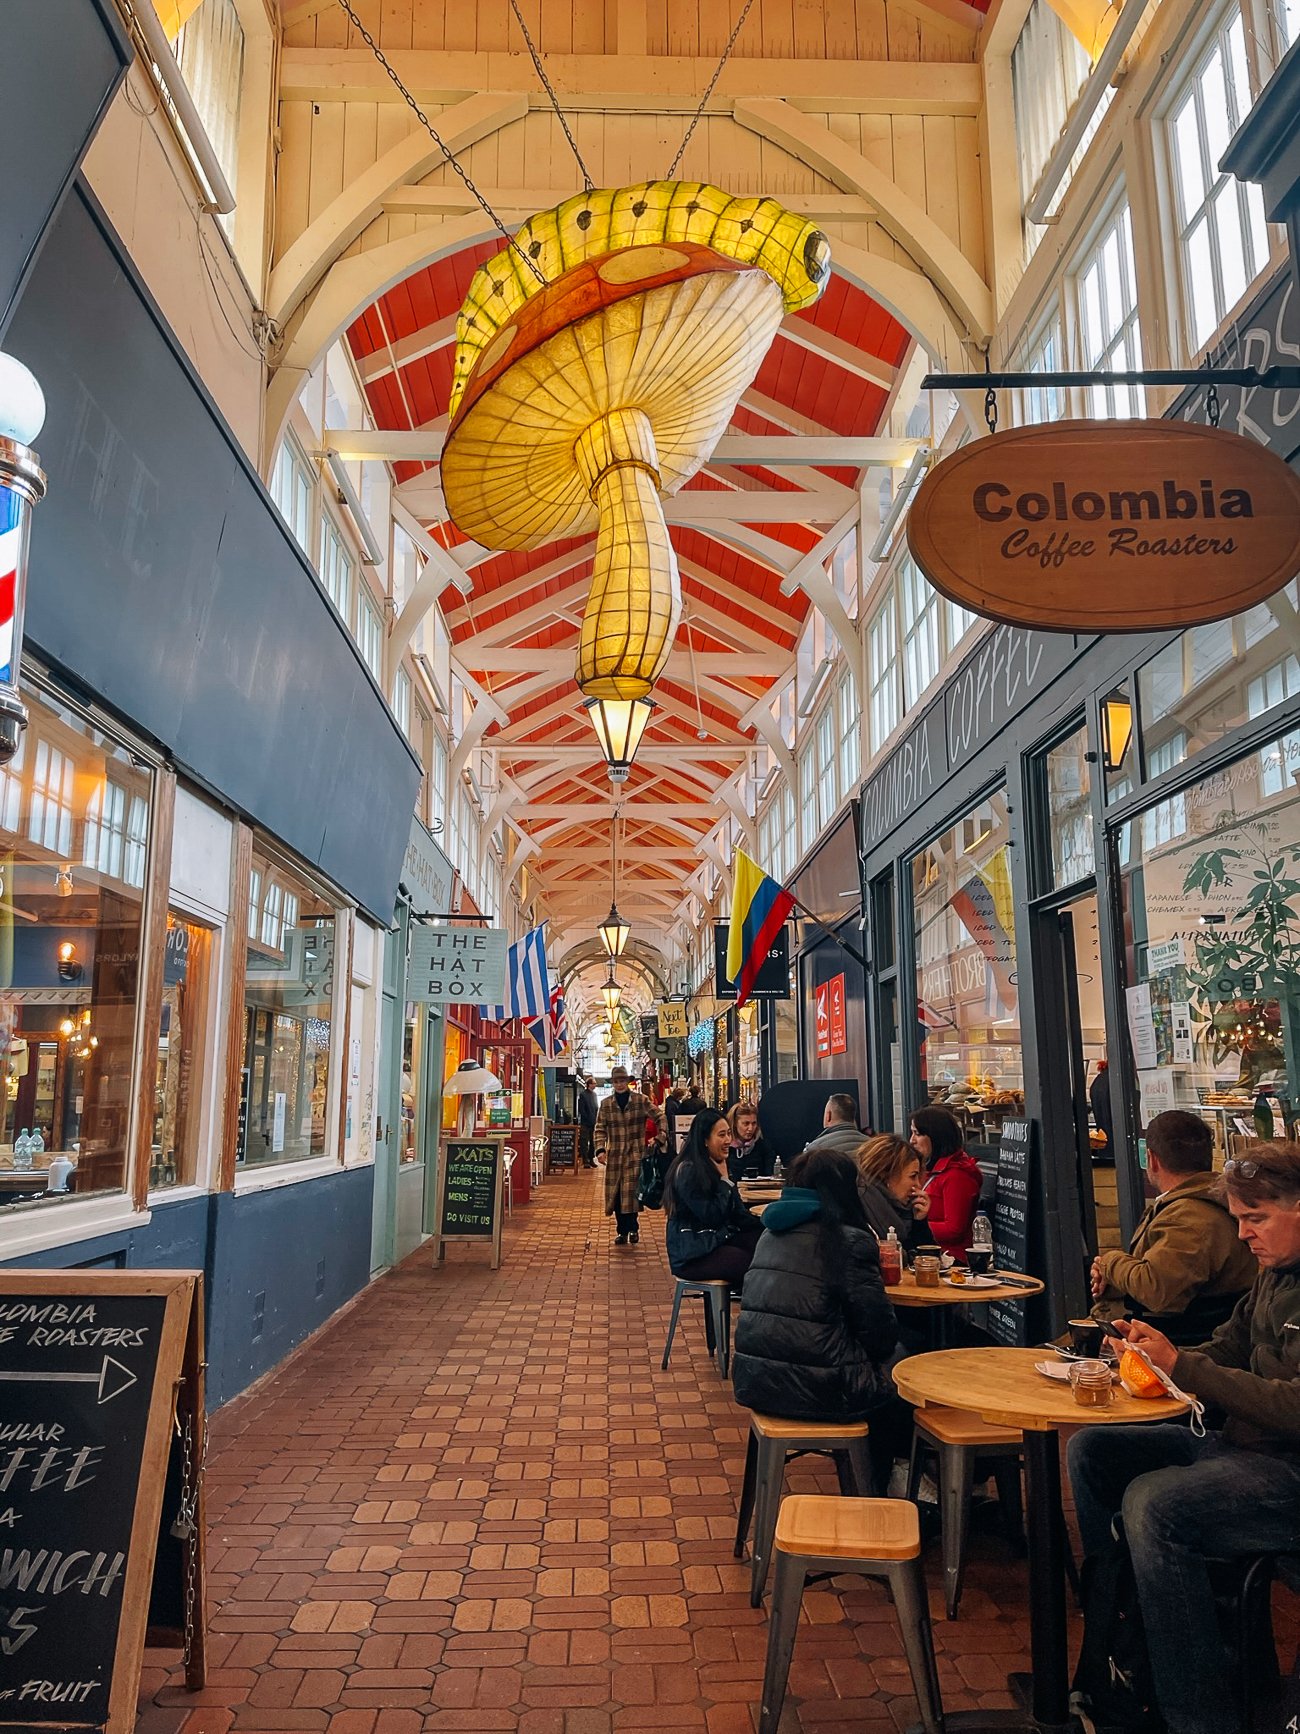 Oxford Covered Market and Colombia Coffee Roasters